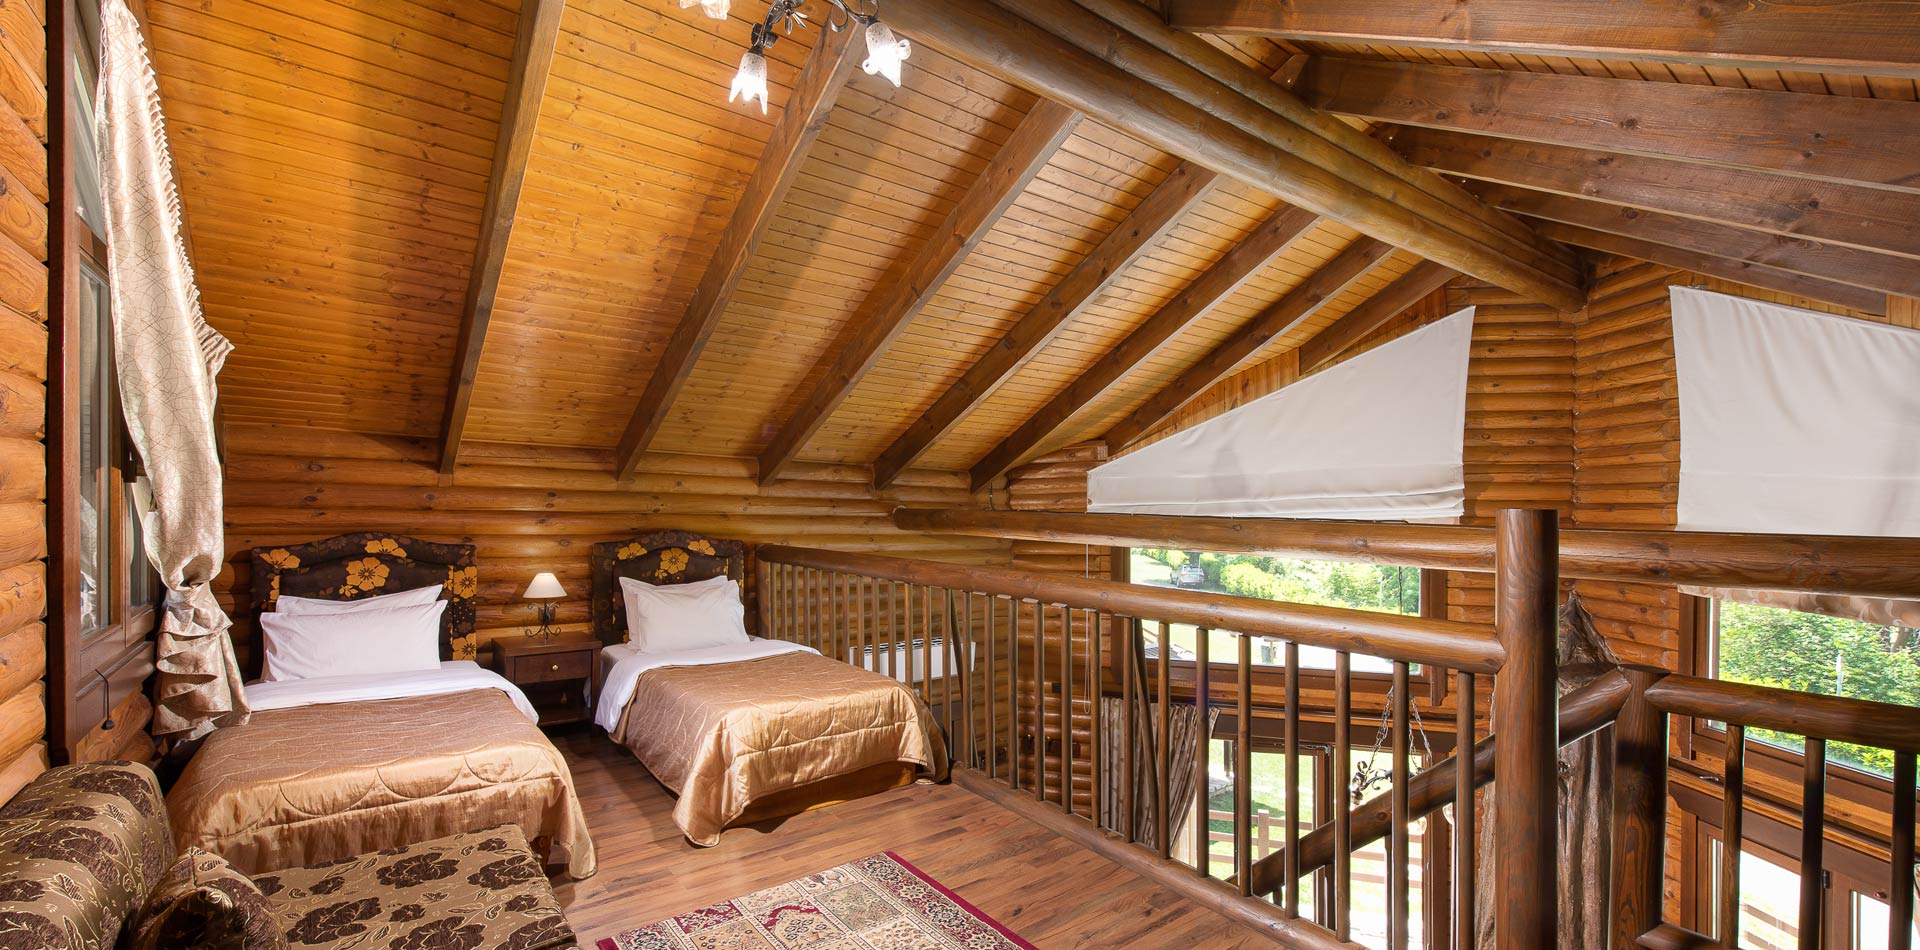 Beds at Natura Chalet's second floor